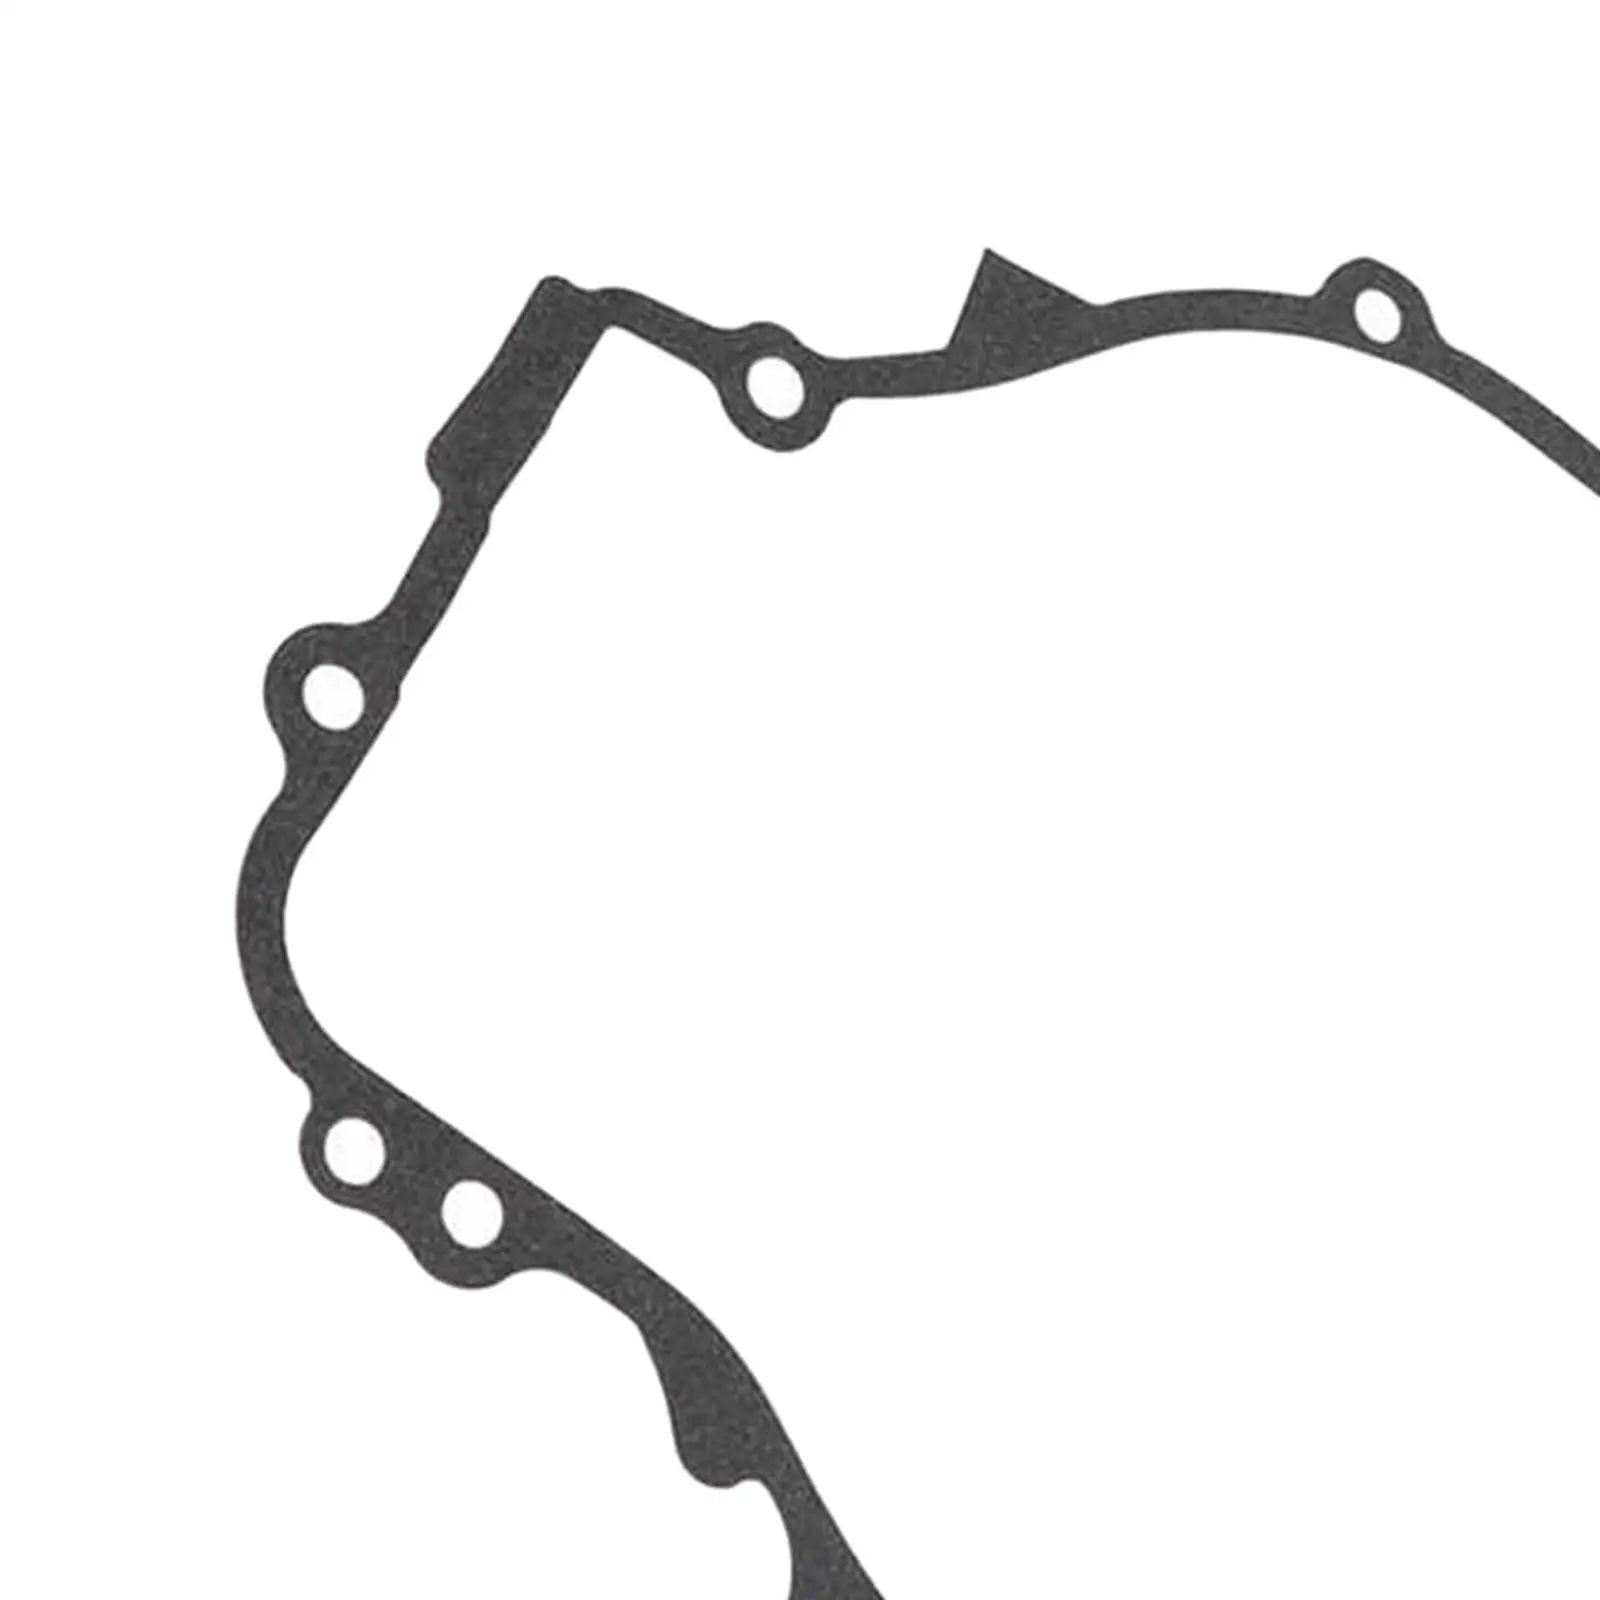 Vehicle Pull Start Gasket 3084933 for Polaris Sportsman 500 1996?2011 Replace Parts